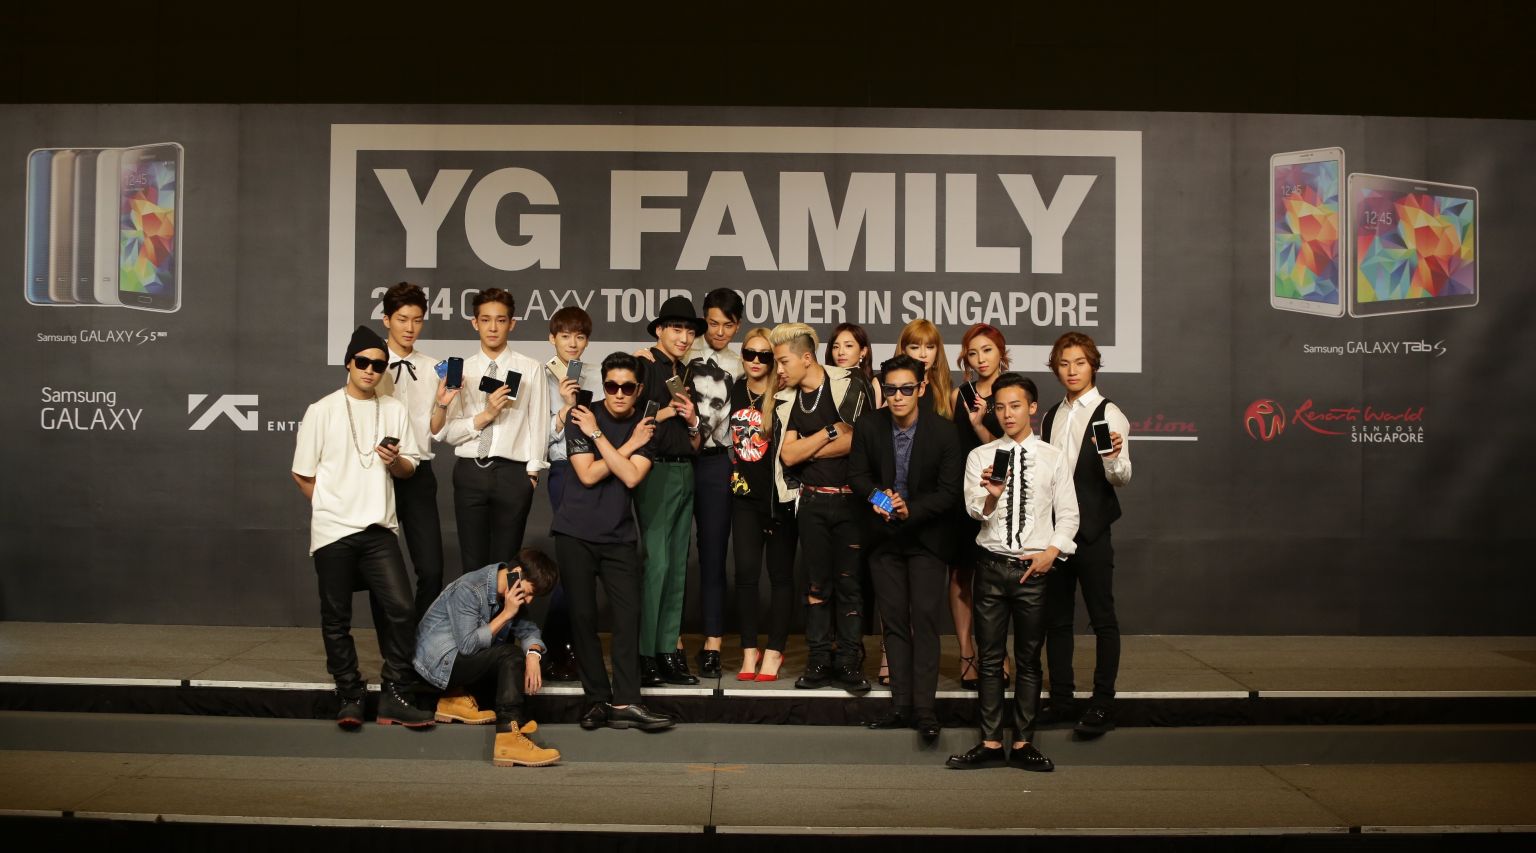 A group photo of the YG Family artistes at the Samsung press conference, posing with the latest Samsung devices